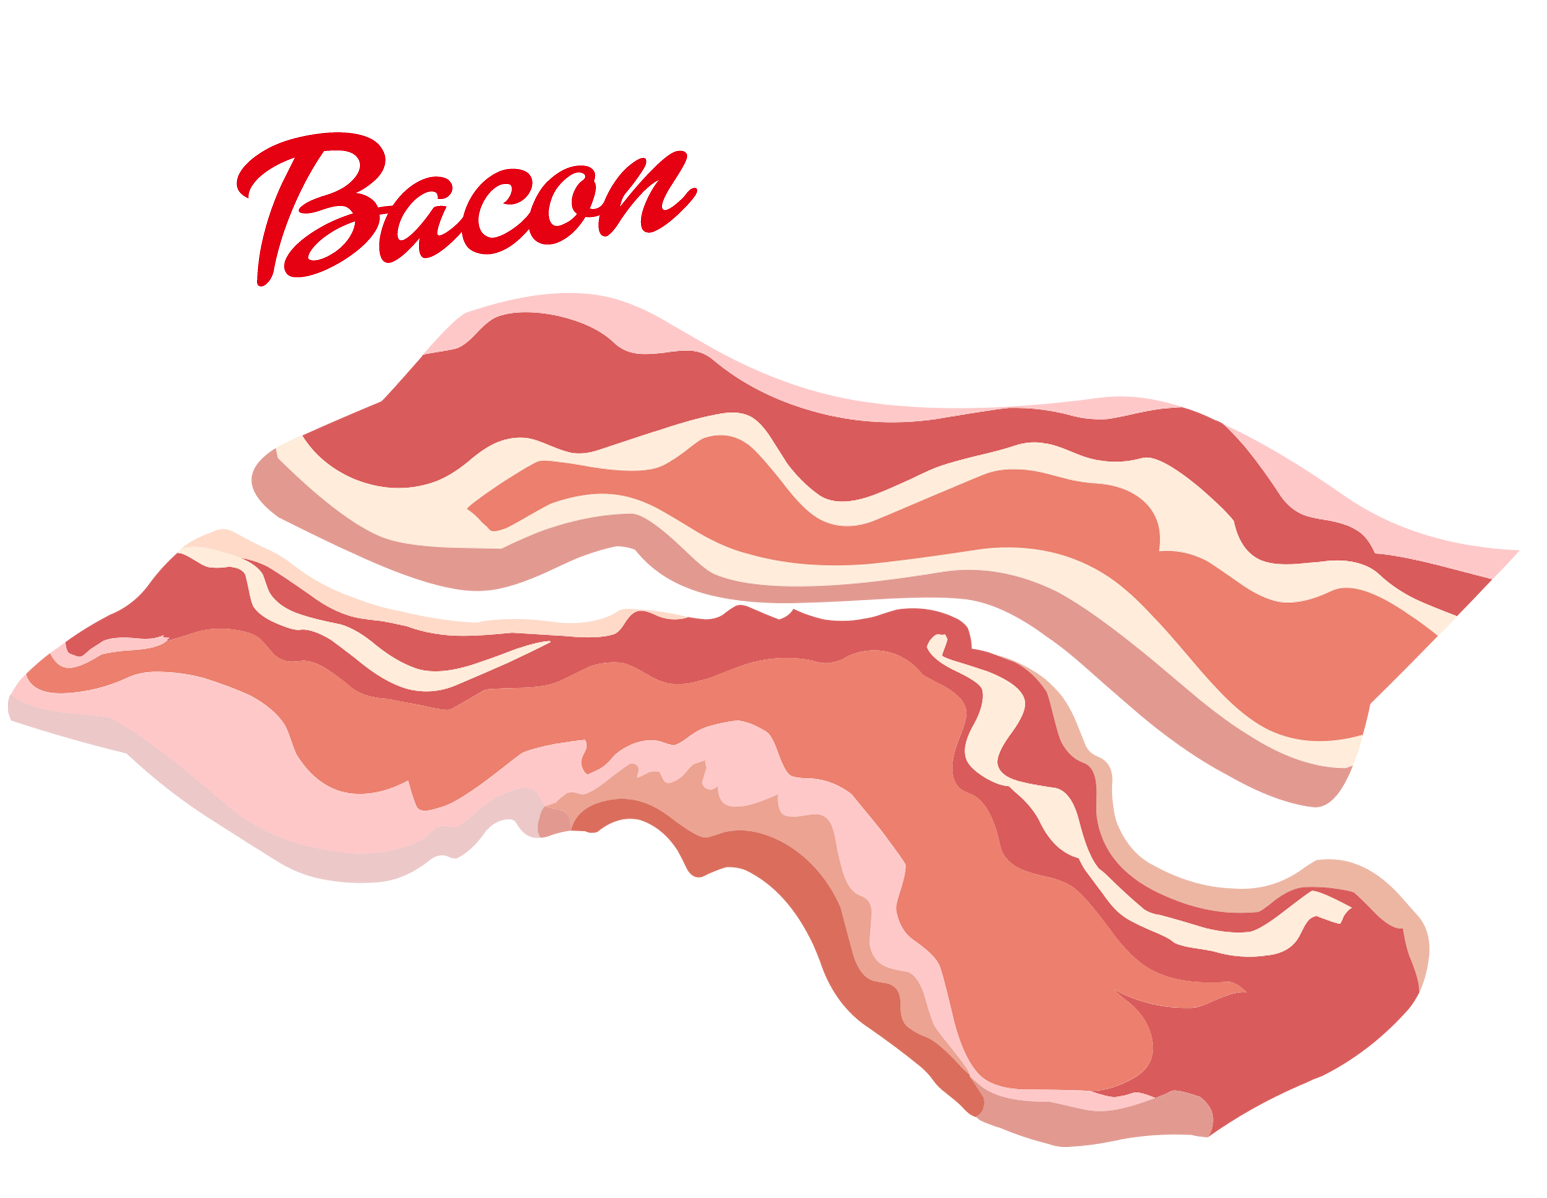 Bacon clipart flatworm. Name png ready made